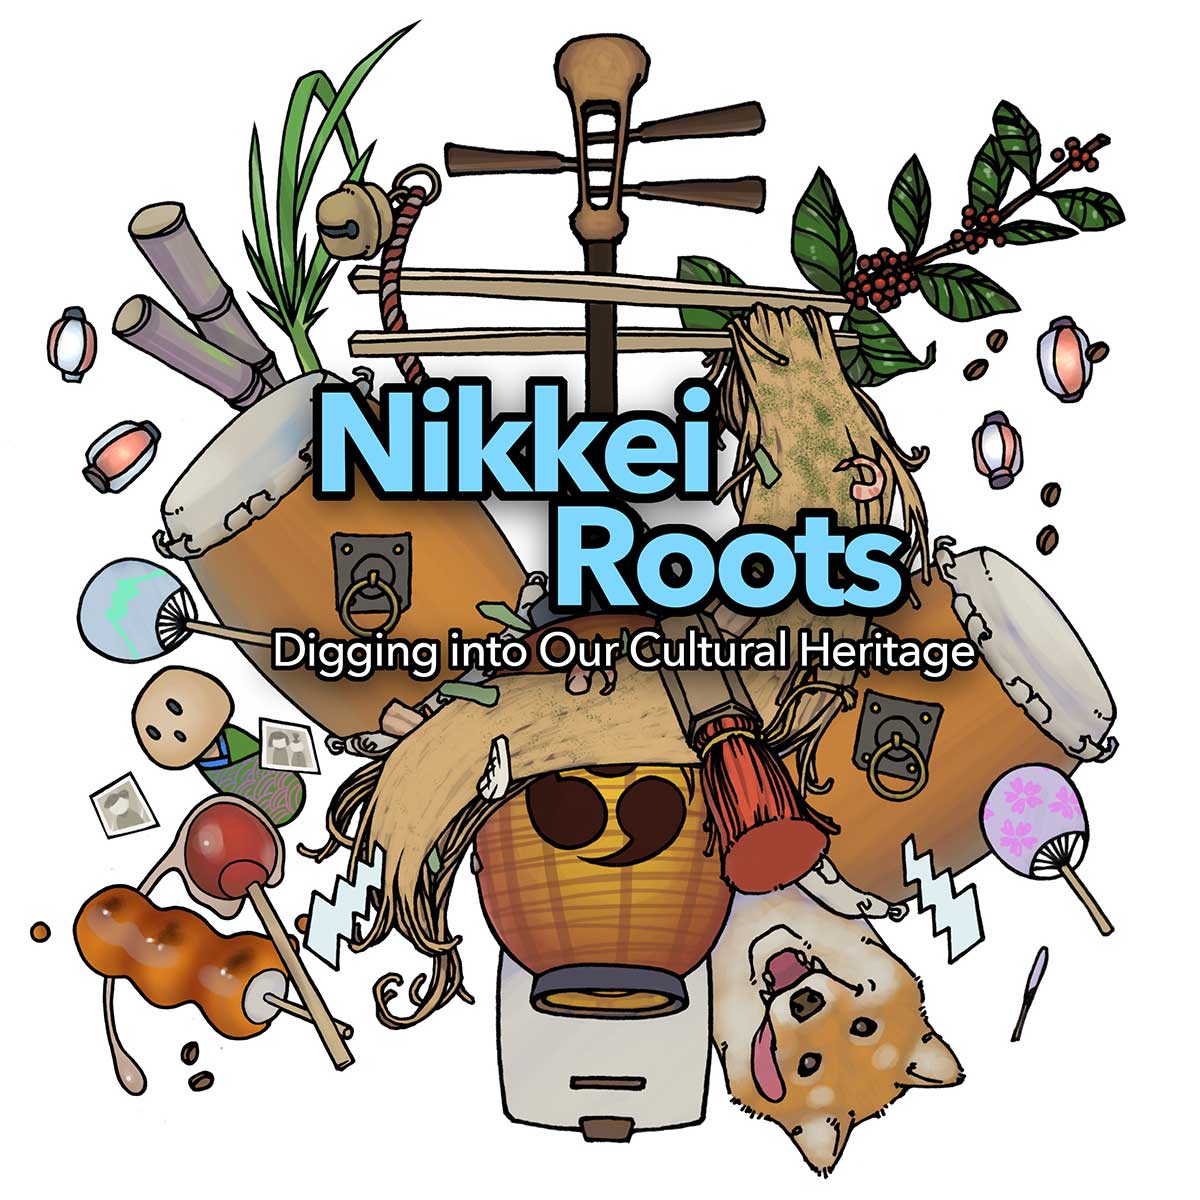 Nikkei Roots: Digging into Our Cultural Heritage